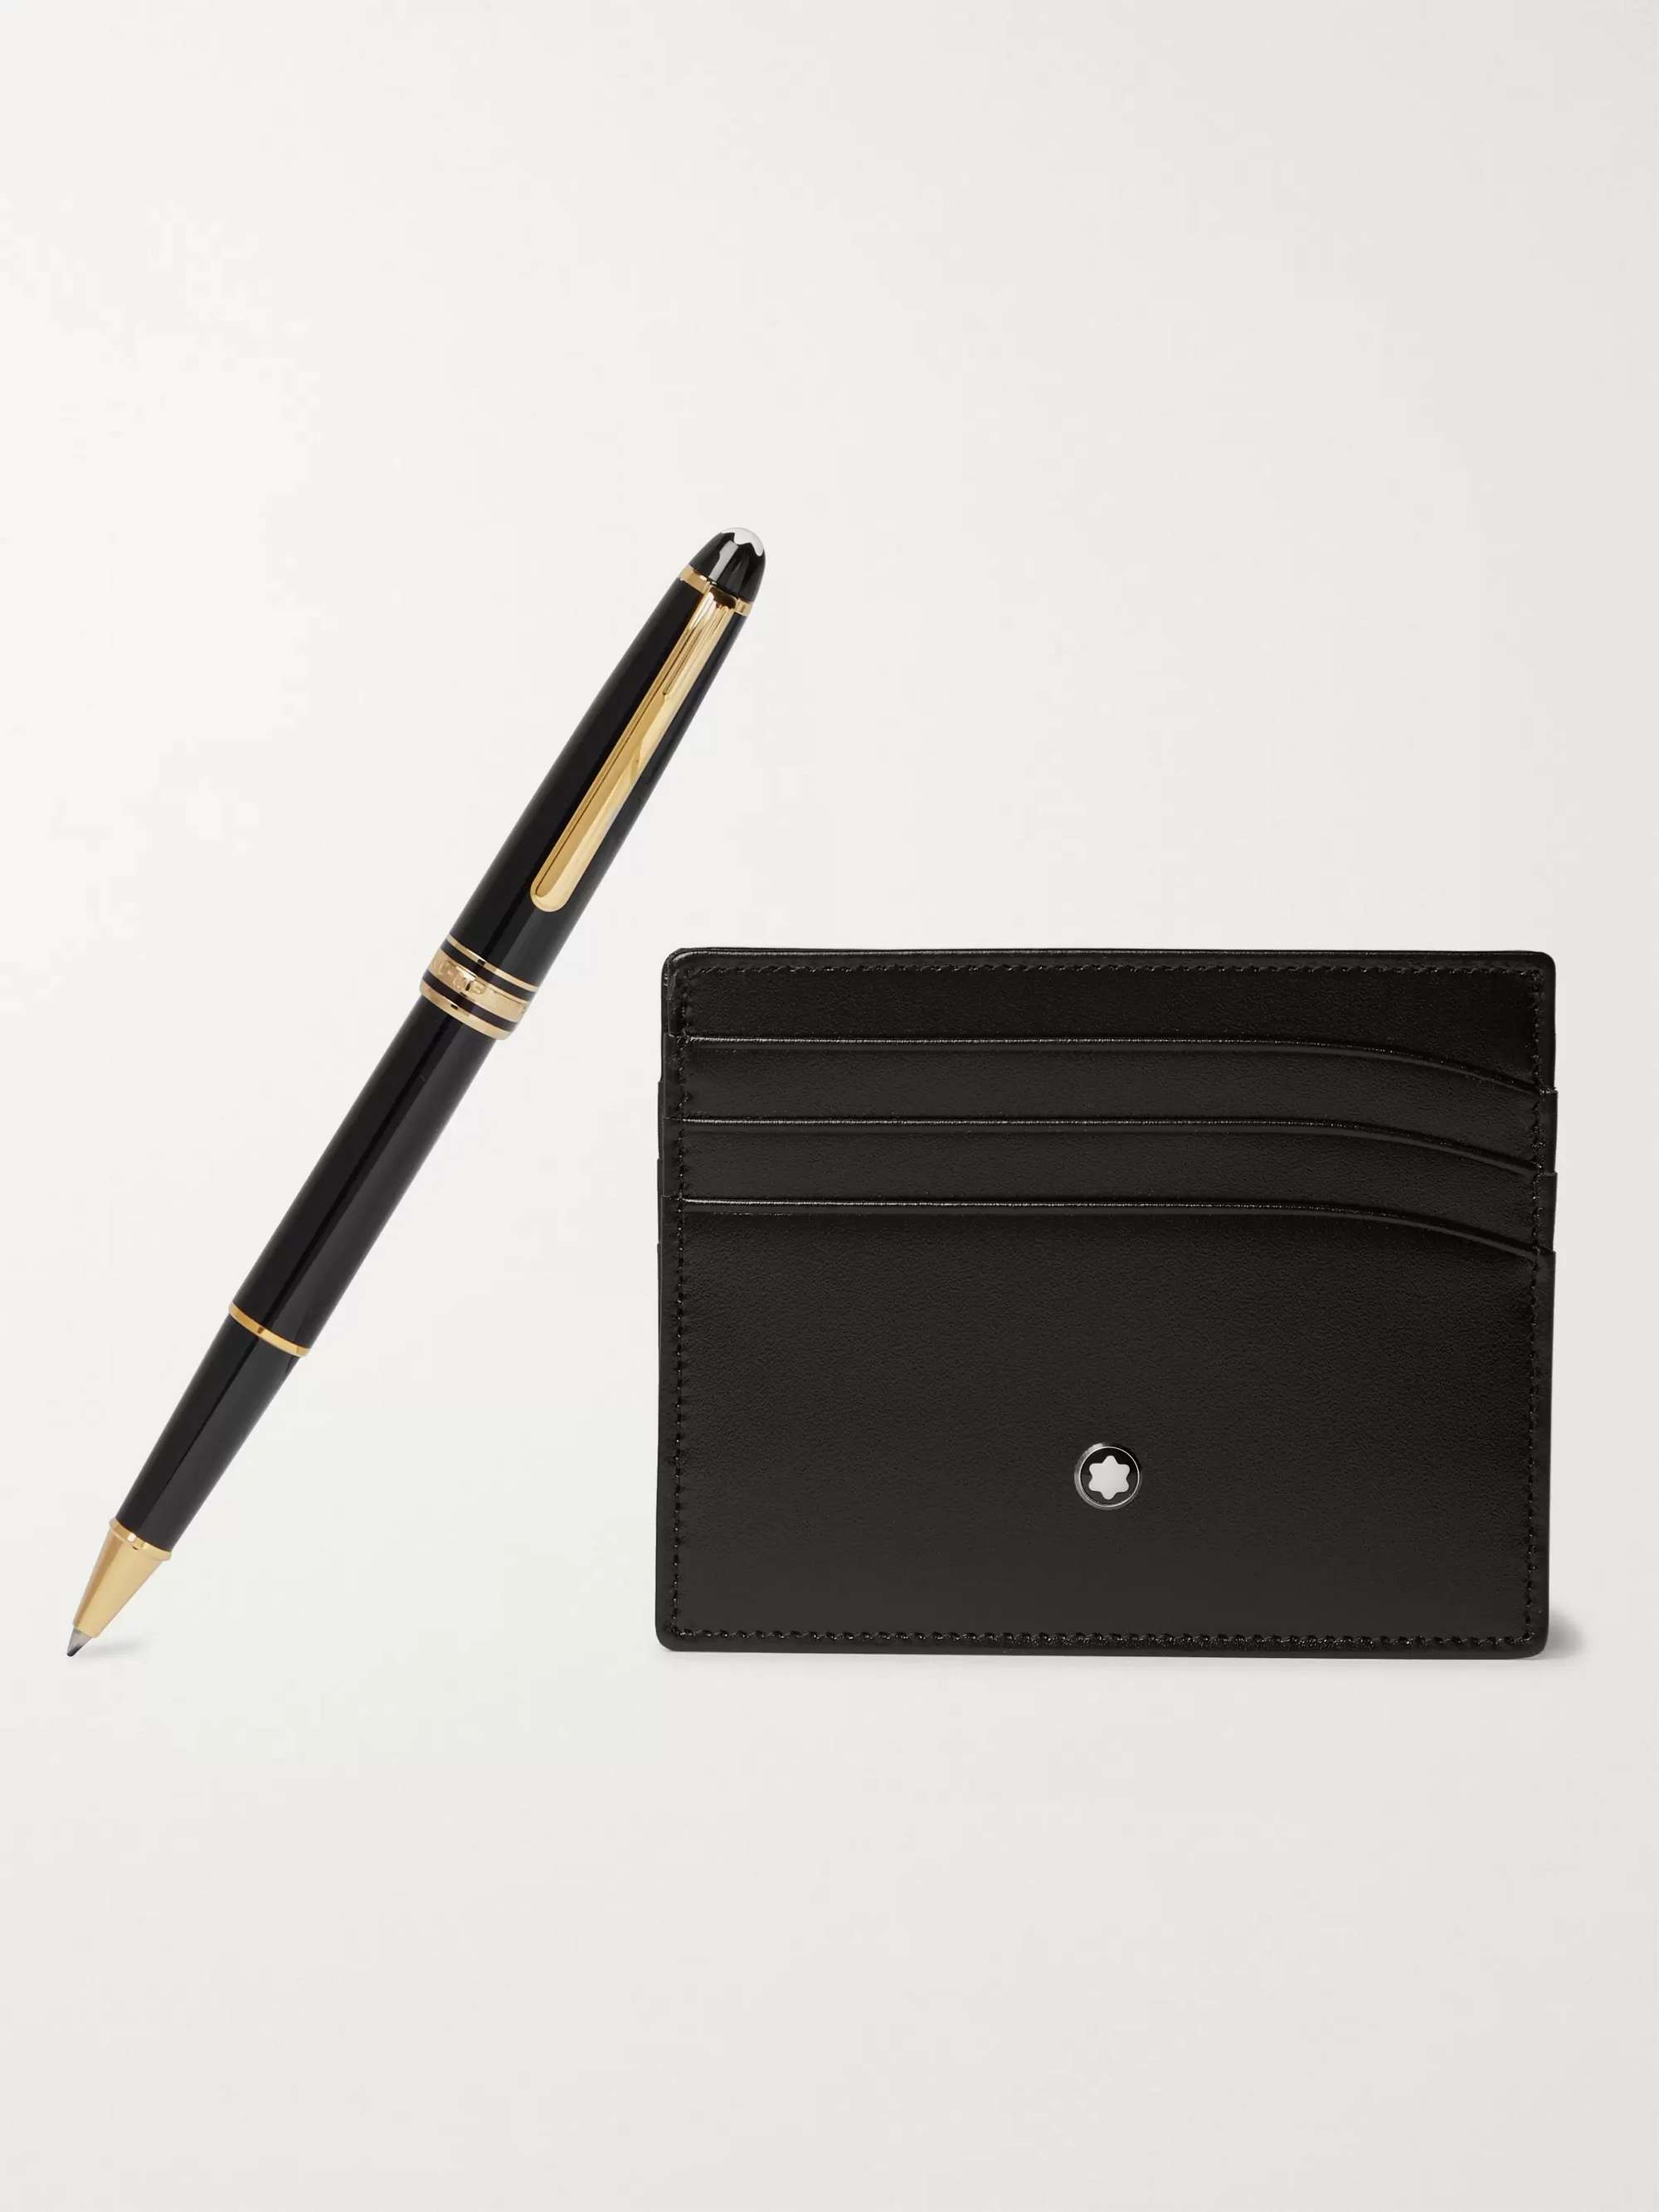 MONTBLANC Meisterstück Leather Cardholder and Resin Rollerball Pen Set